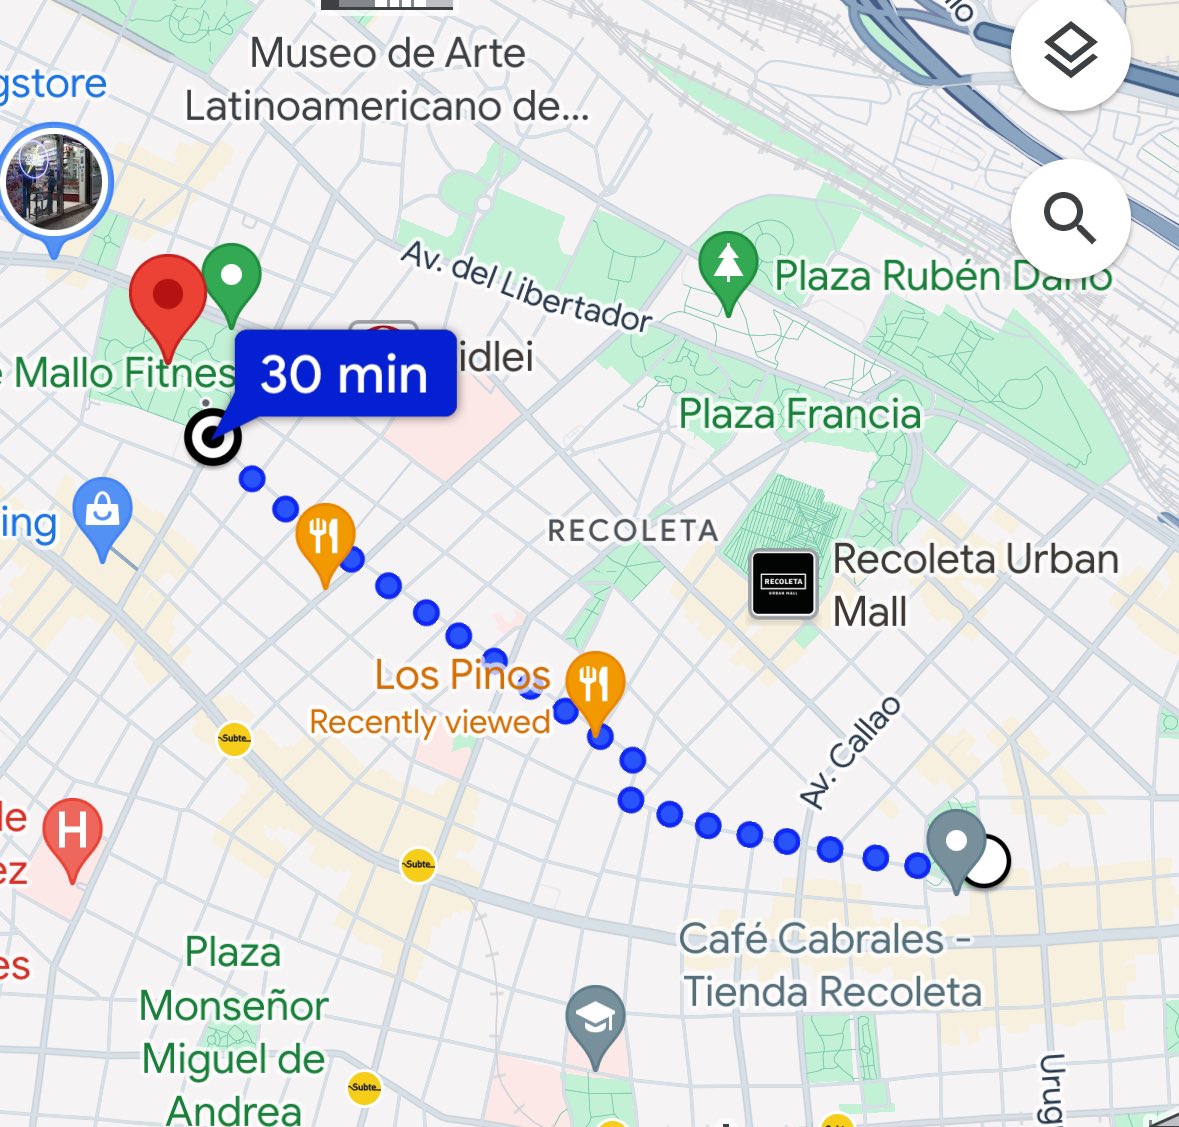 - Google maps in Latin America “30 minute walk”. Takes me 20 minutes. - Google maps in the Middle East “30 minute walk”. Takes me 18 minutes - Google maps in Germany or Ukraine “30 minute walk”. Takes me 30 minutes Does Google maps take the average speed of locals into account